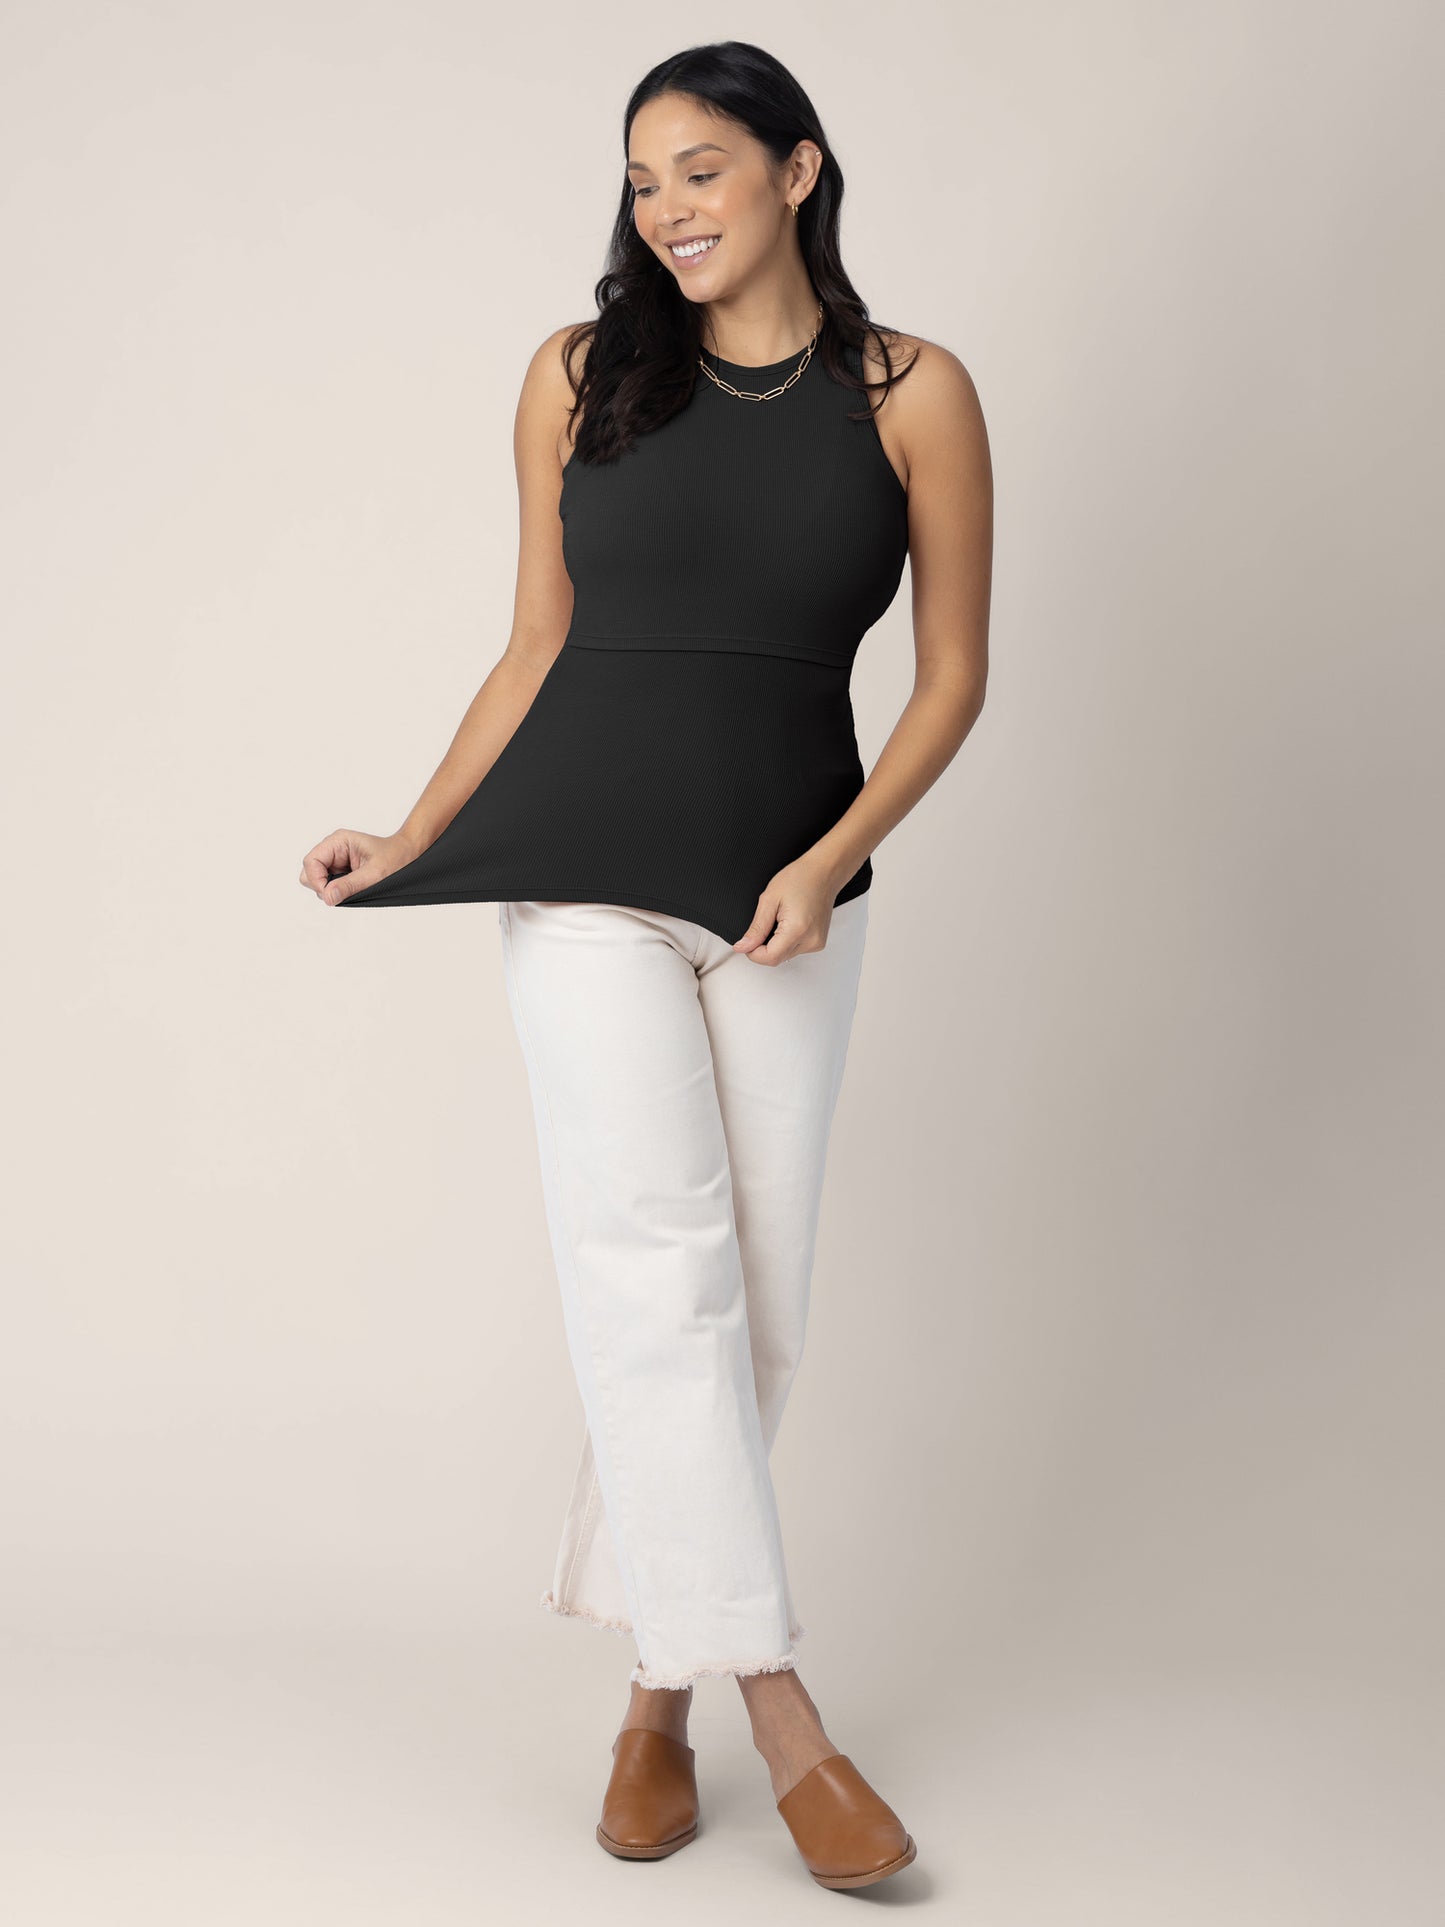 Model wearing the Ribbed Bamboo Racerback Nursing Tank in black, paired with cropped pants and shoes